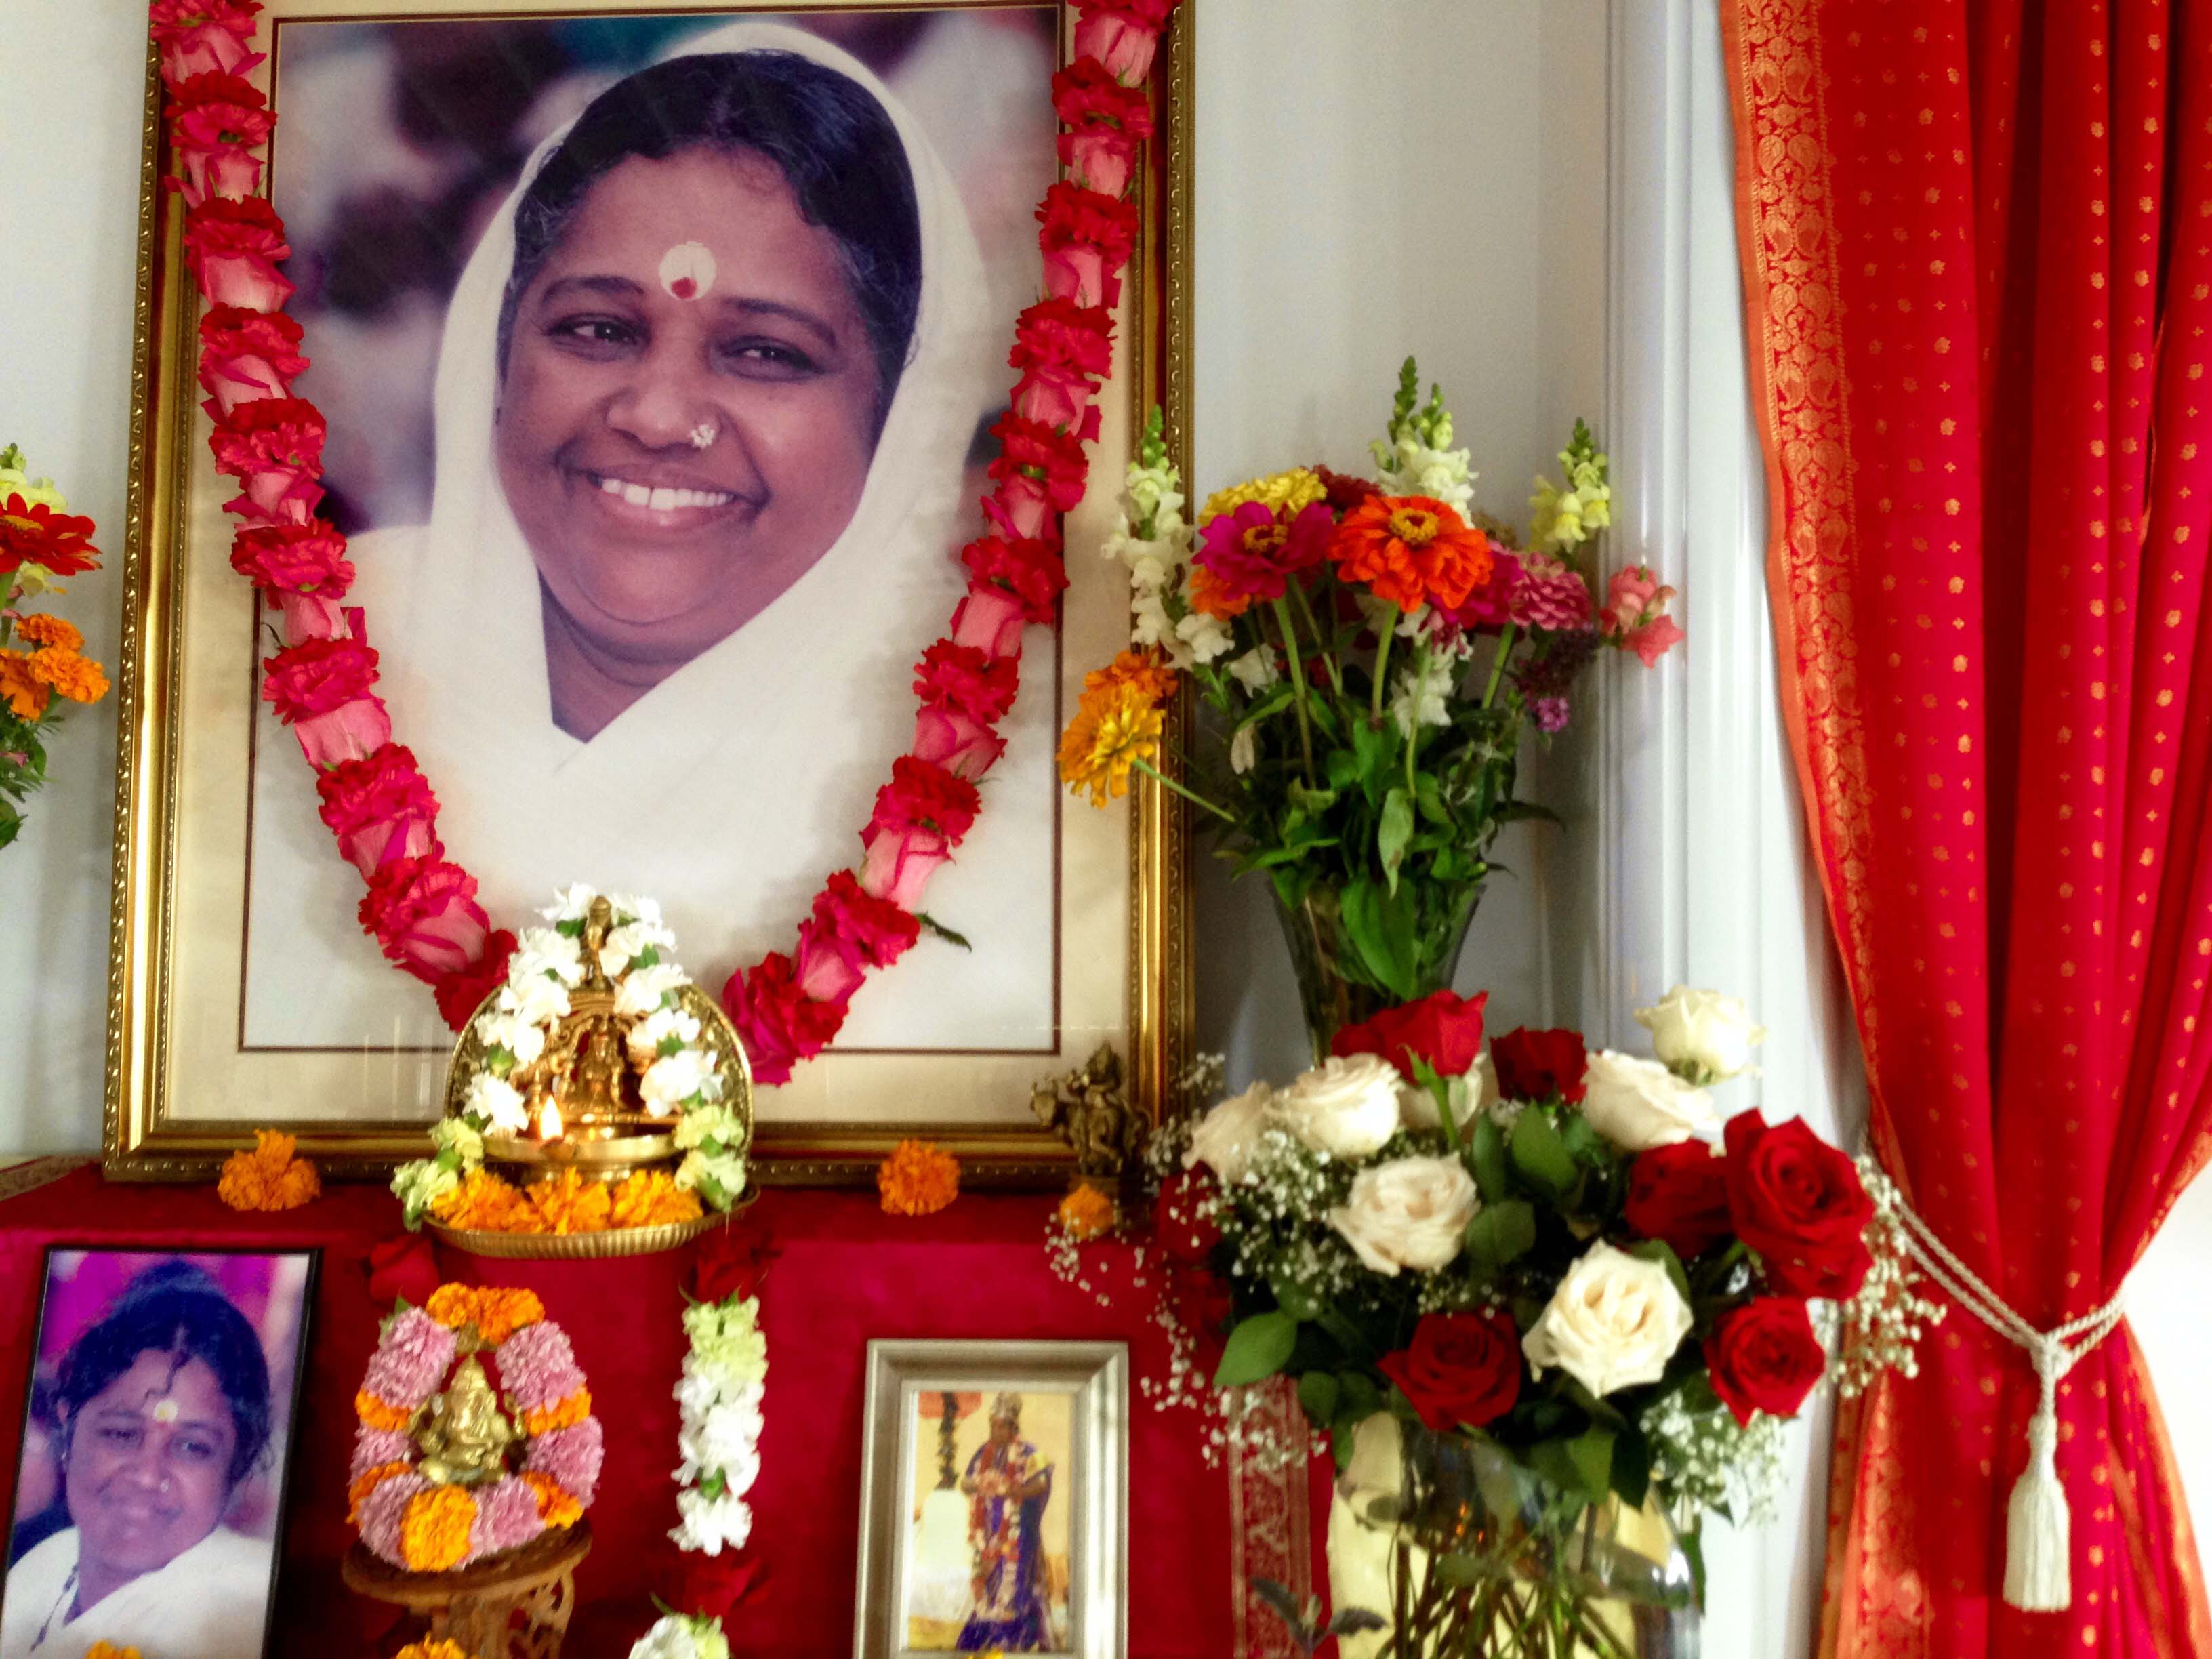 Amma's photo on altar decorated with fresh flowers